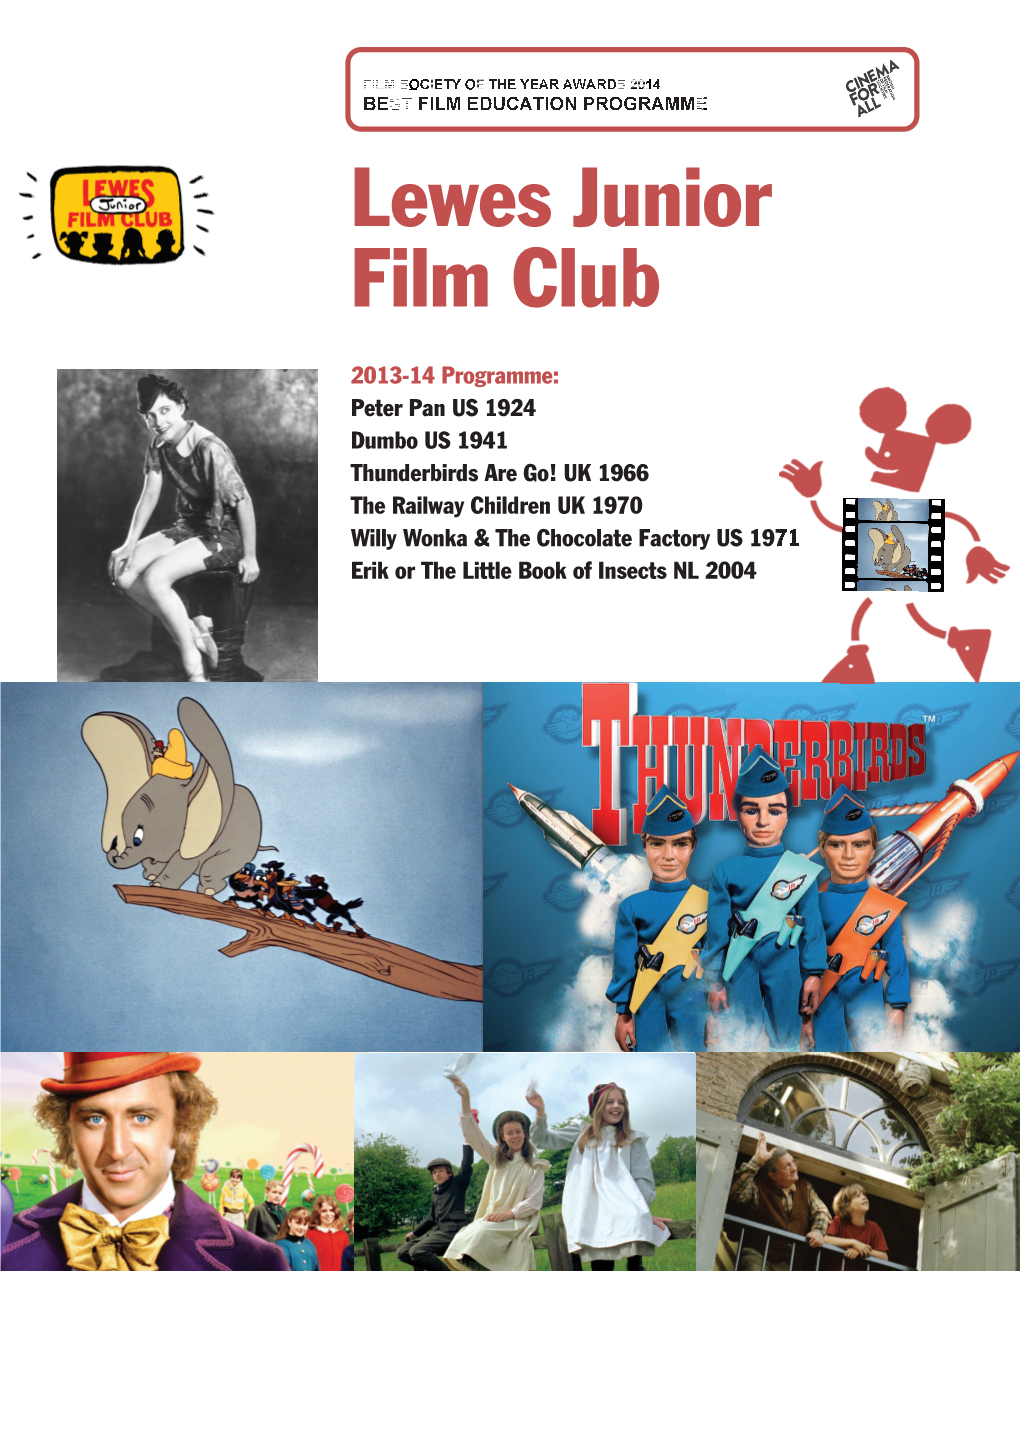 Lewes Junior Film Club to Friends and Family